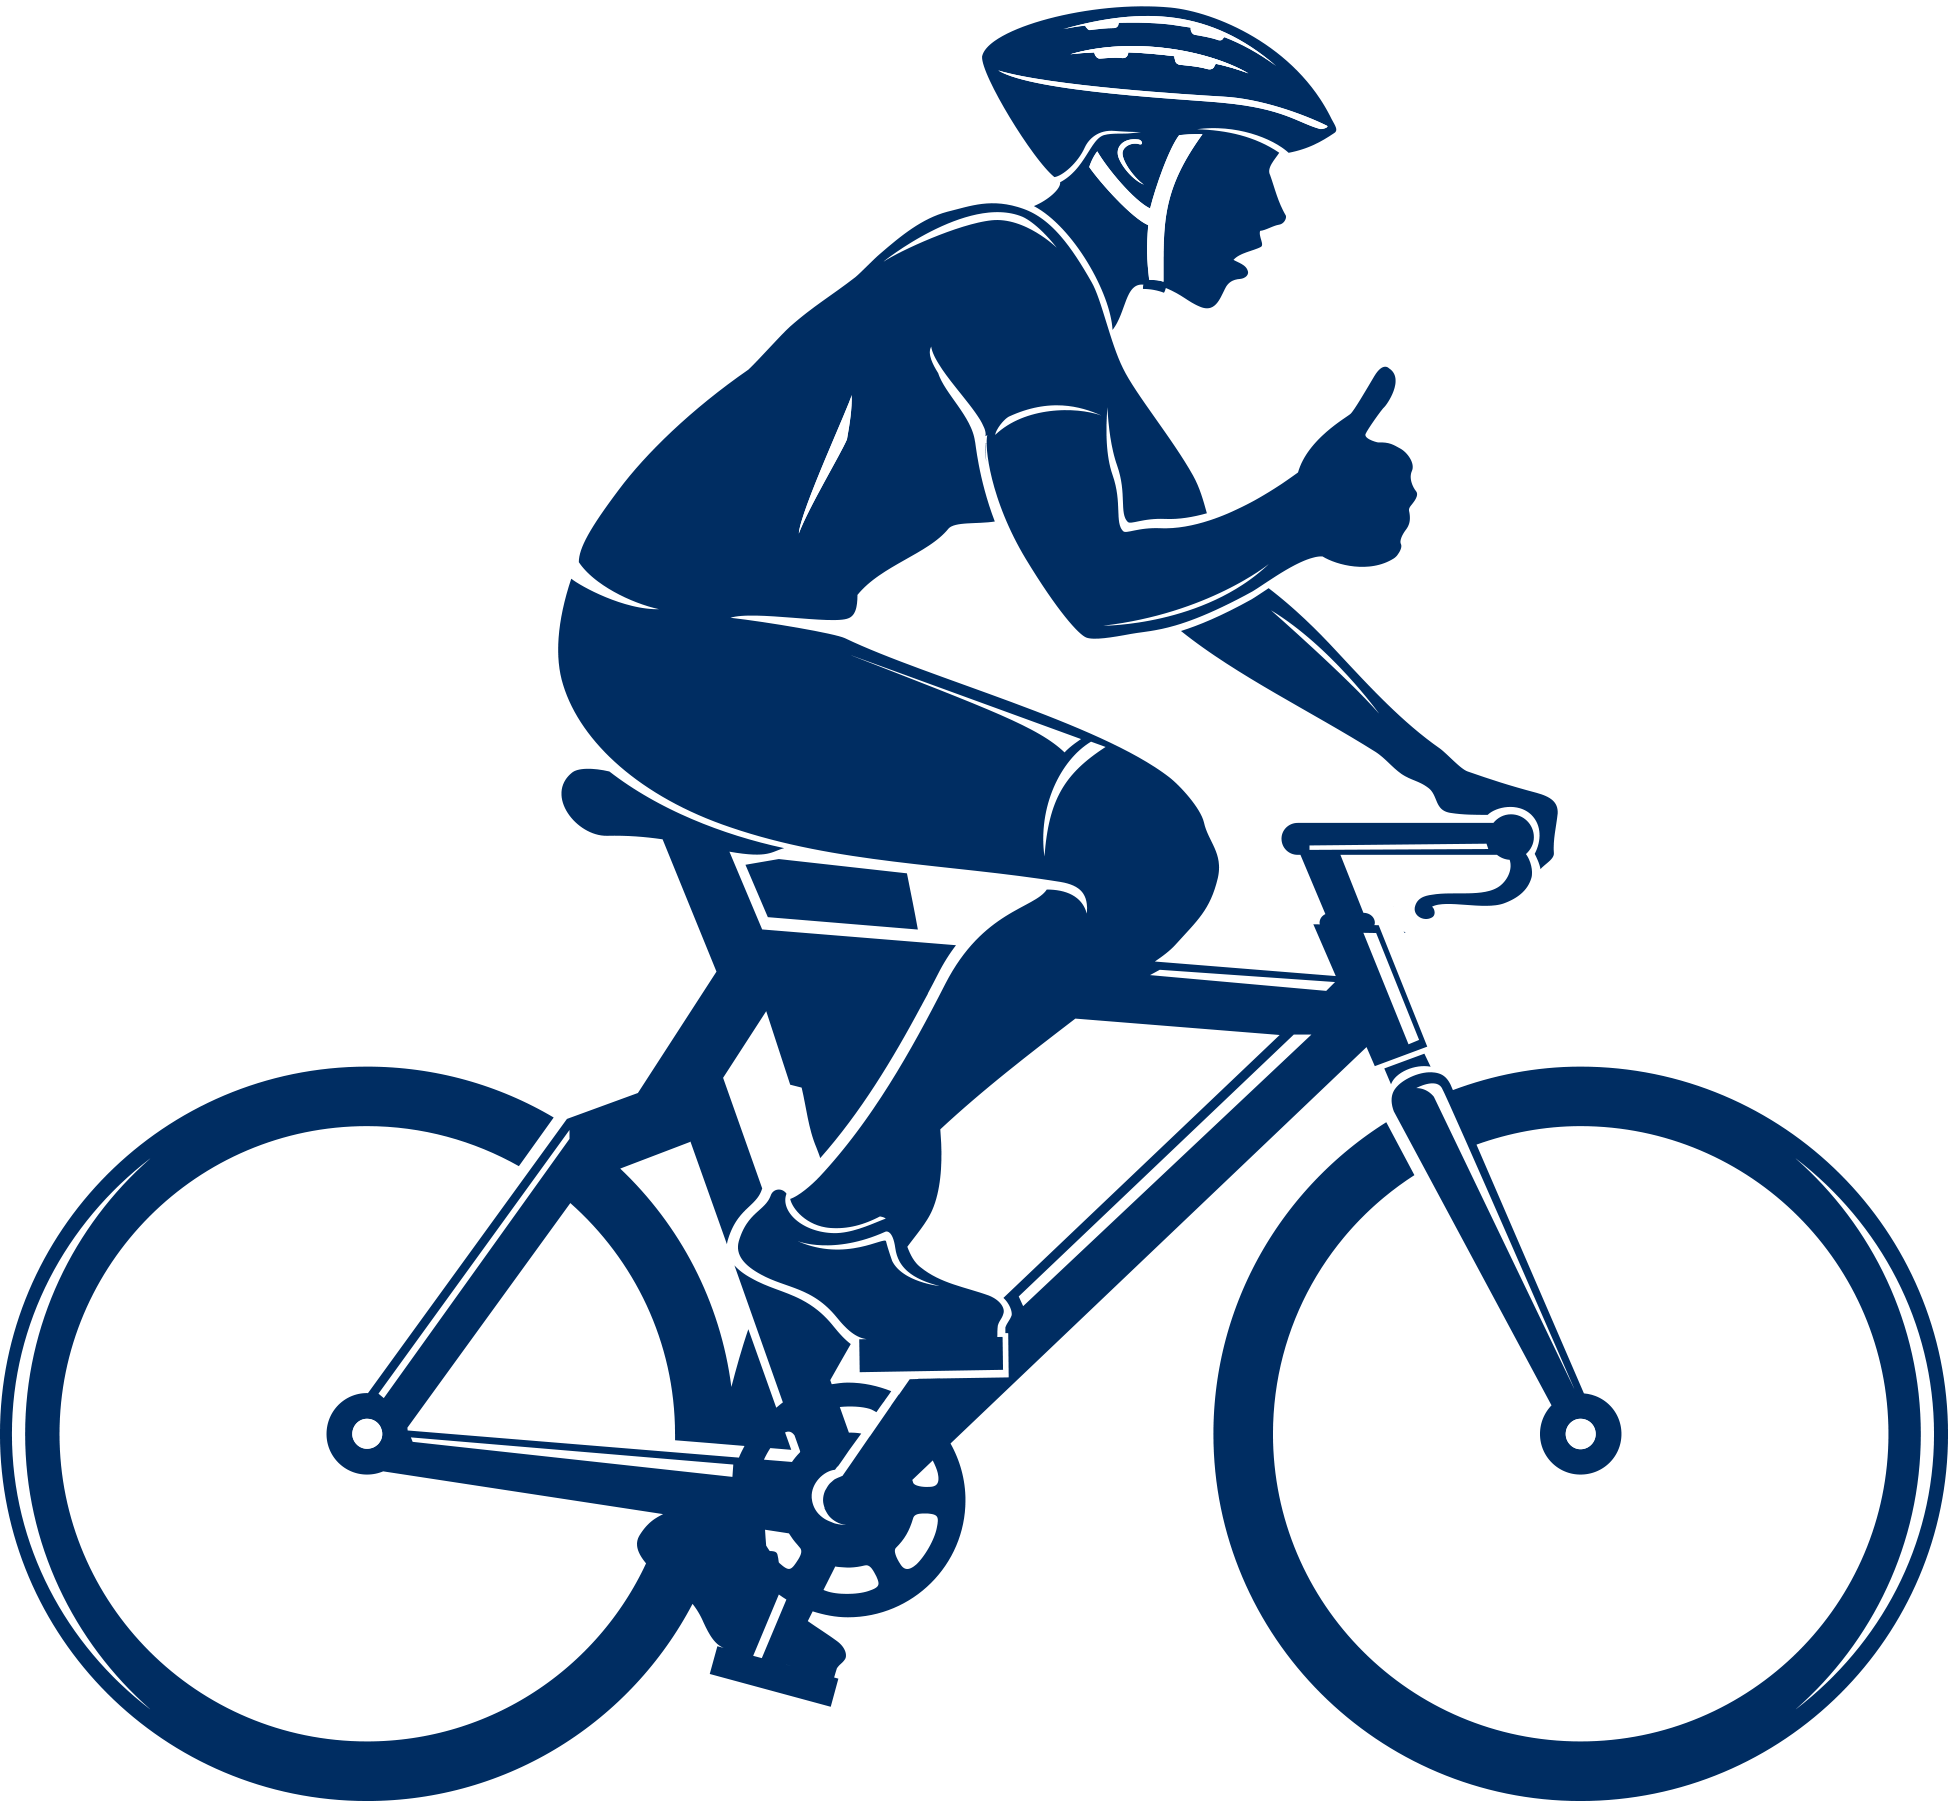 Cycling PNG Image in Transparent pngteam.com